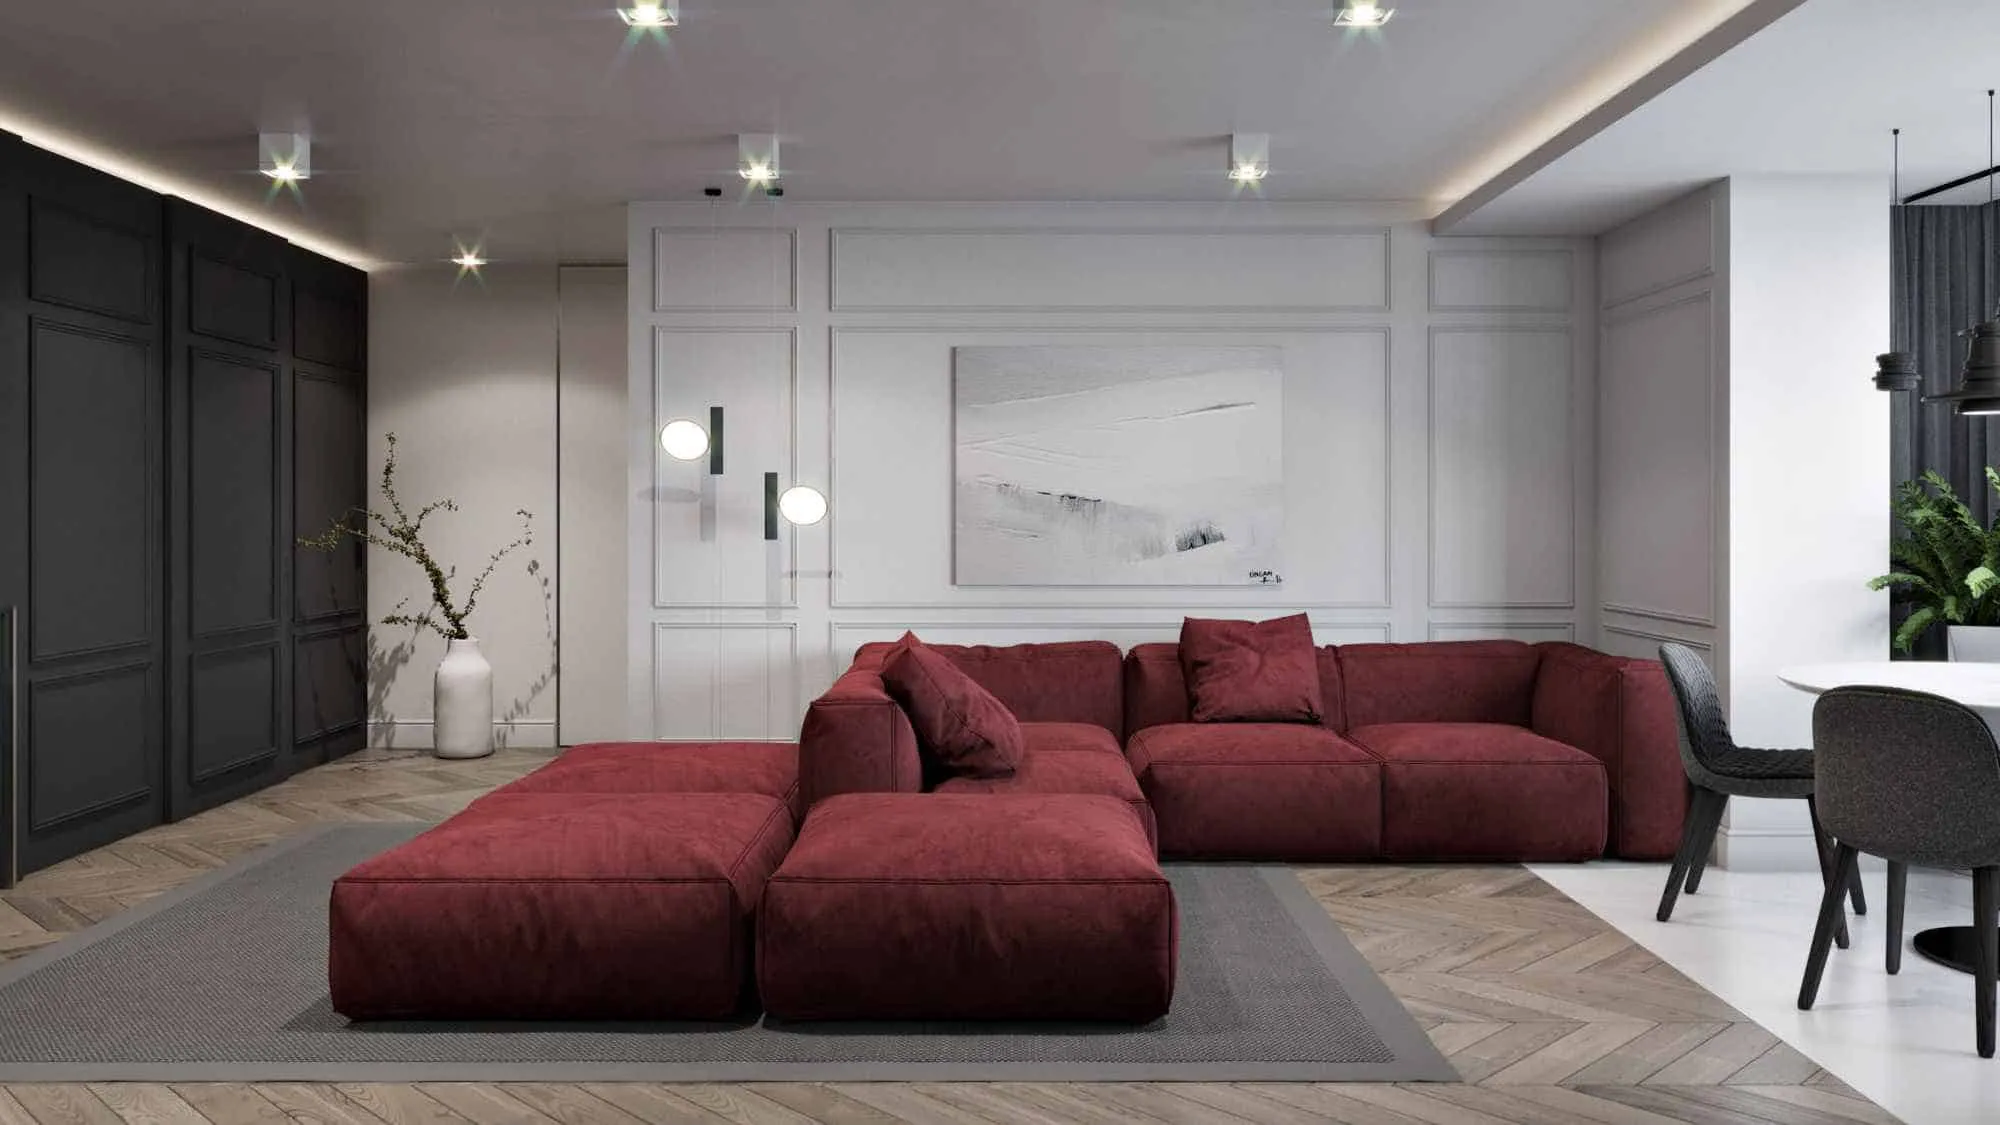 red sofa in a living room with white interiors and a rug